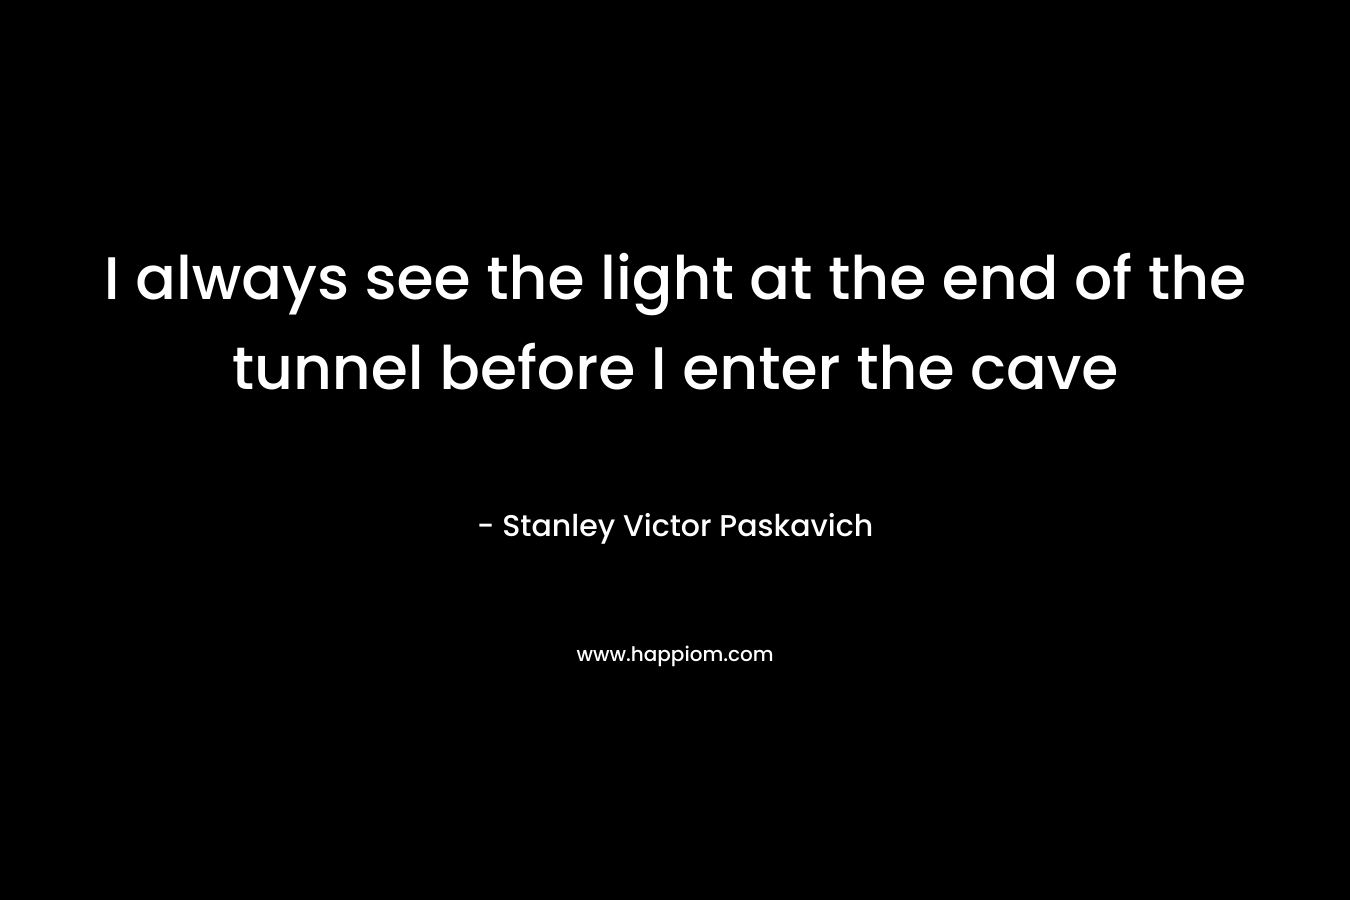 I always see the light at the end of the tunnel before I enter the cave – Stanley Victor Paskavich